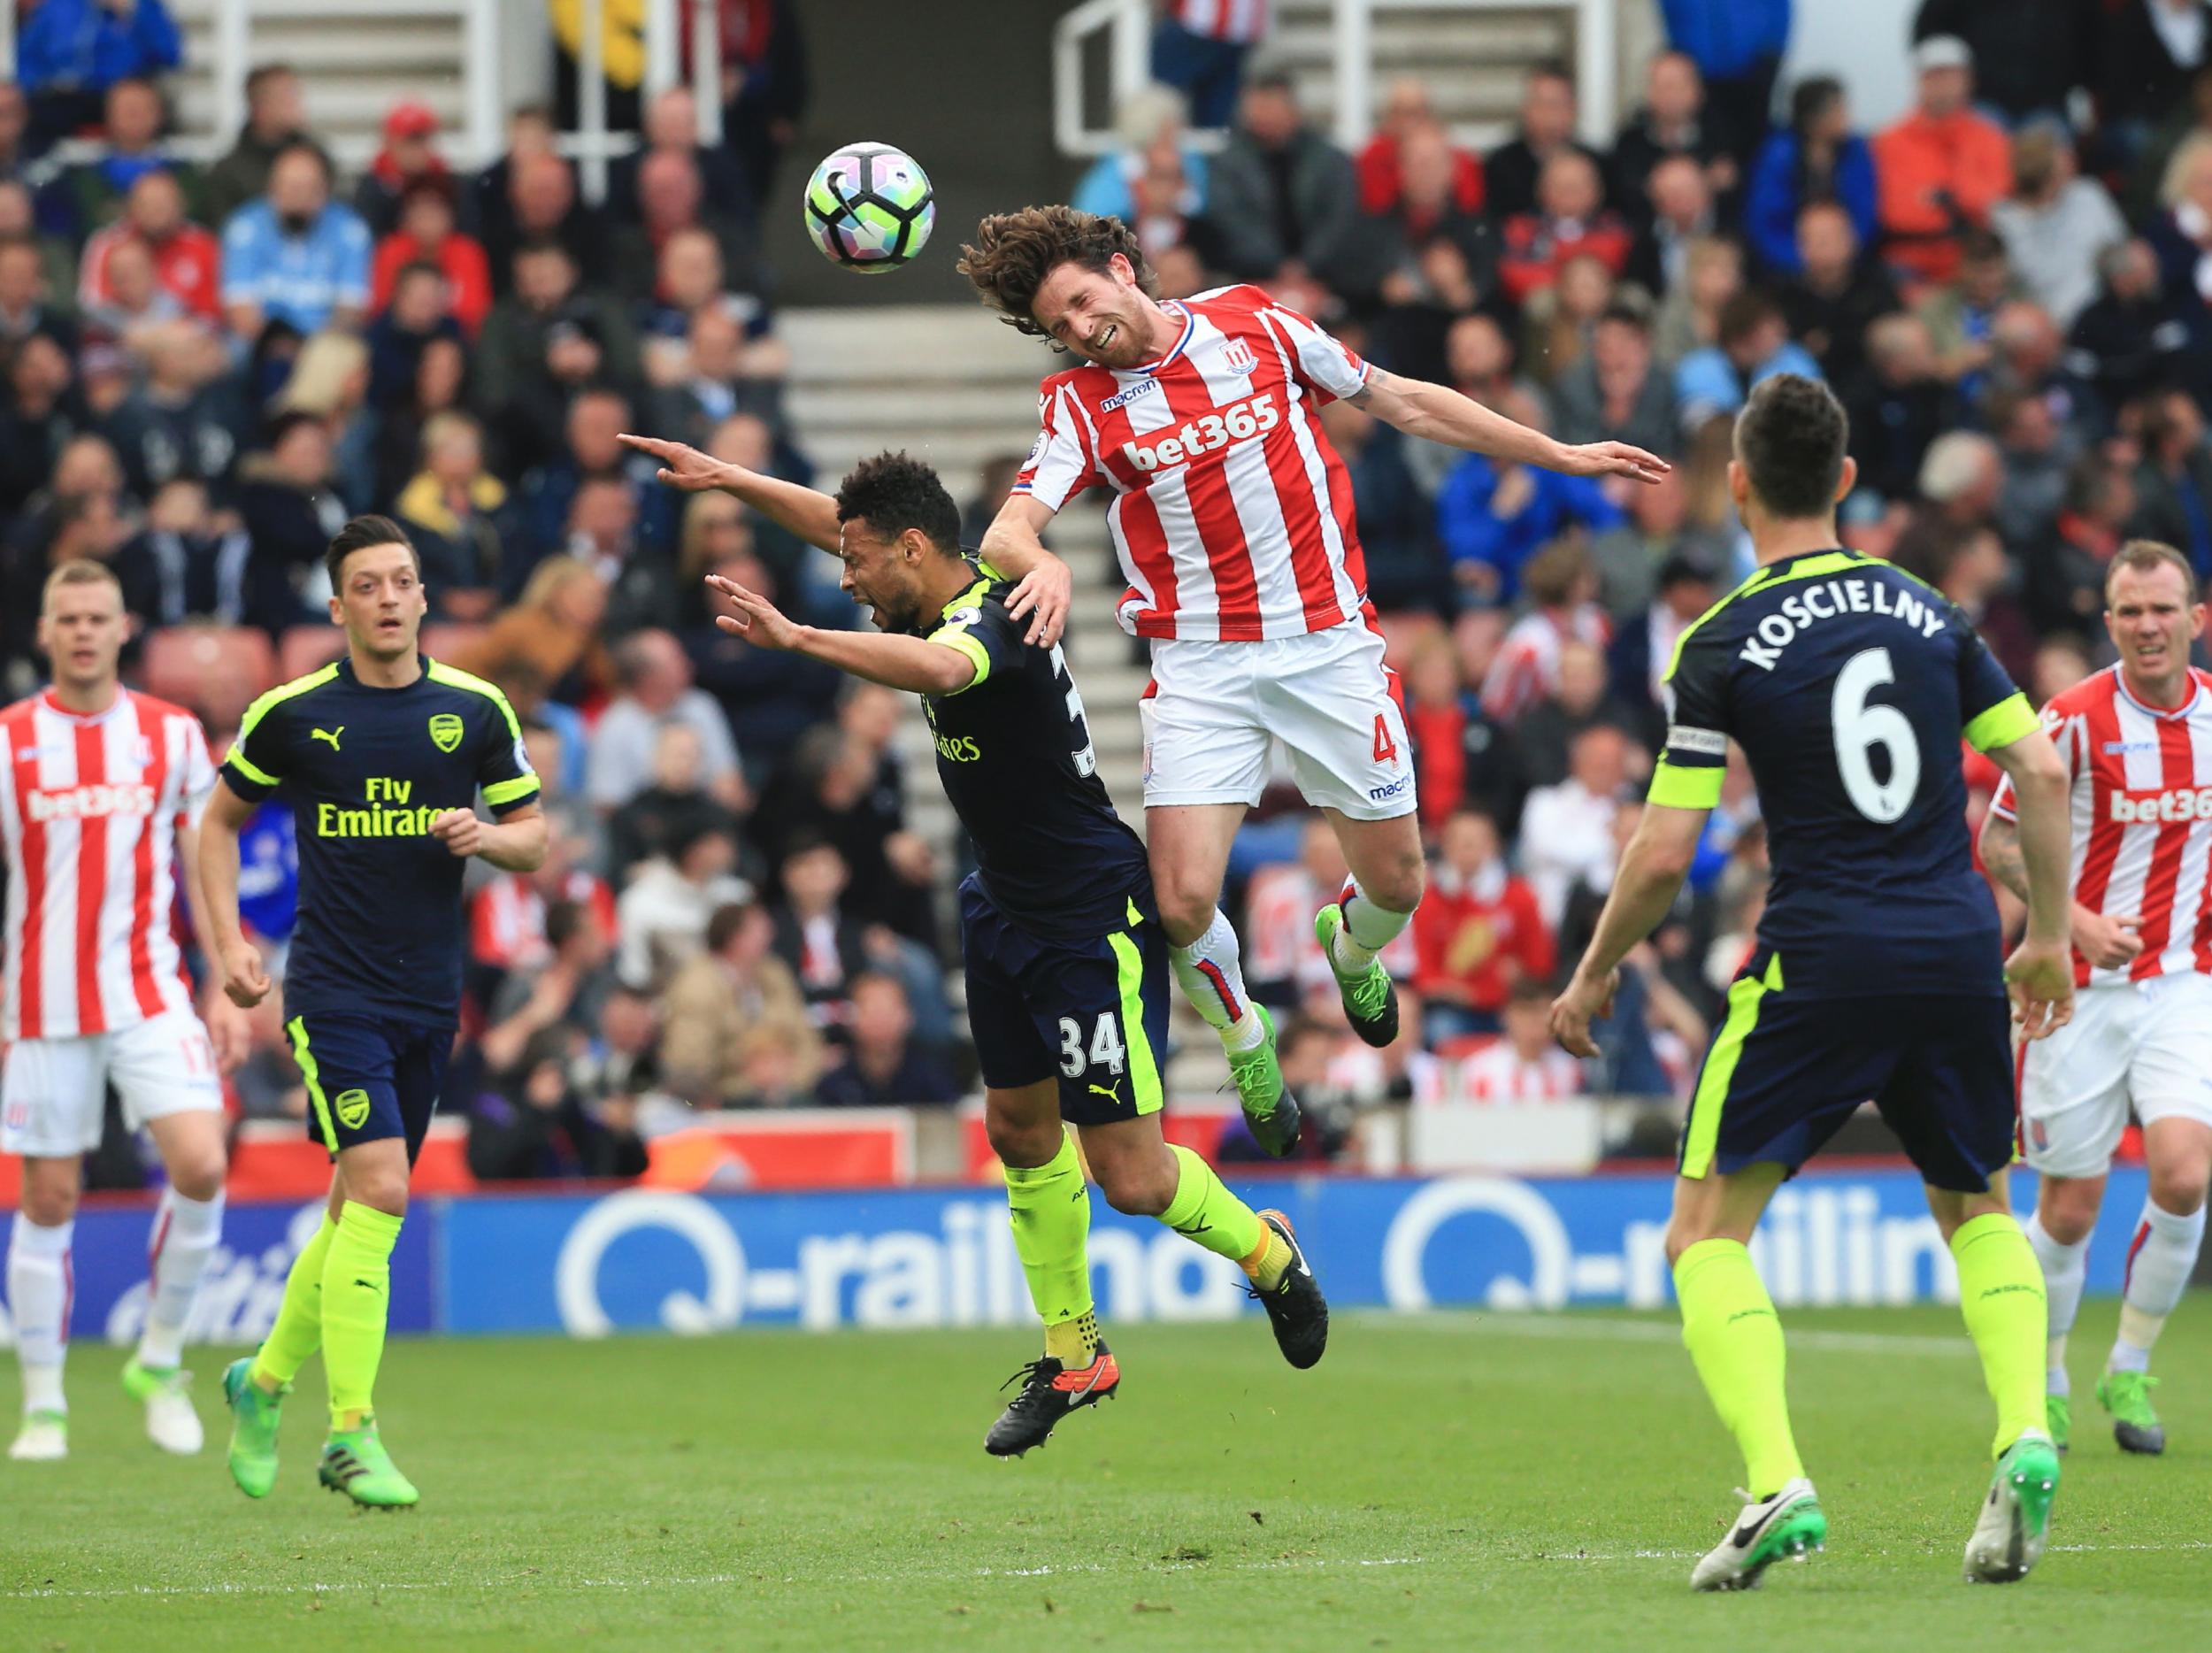 Allen is the odd man out at Stoke